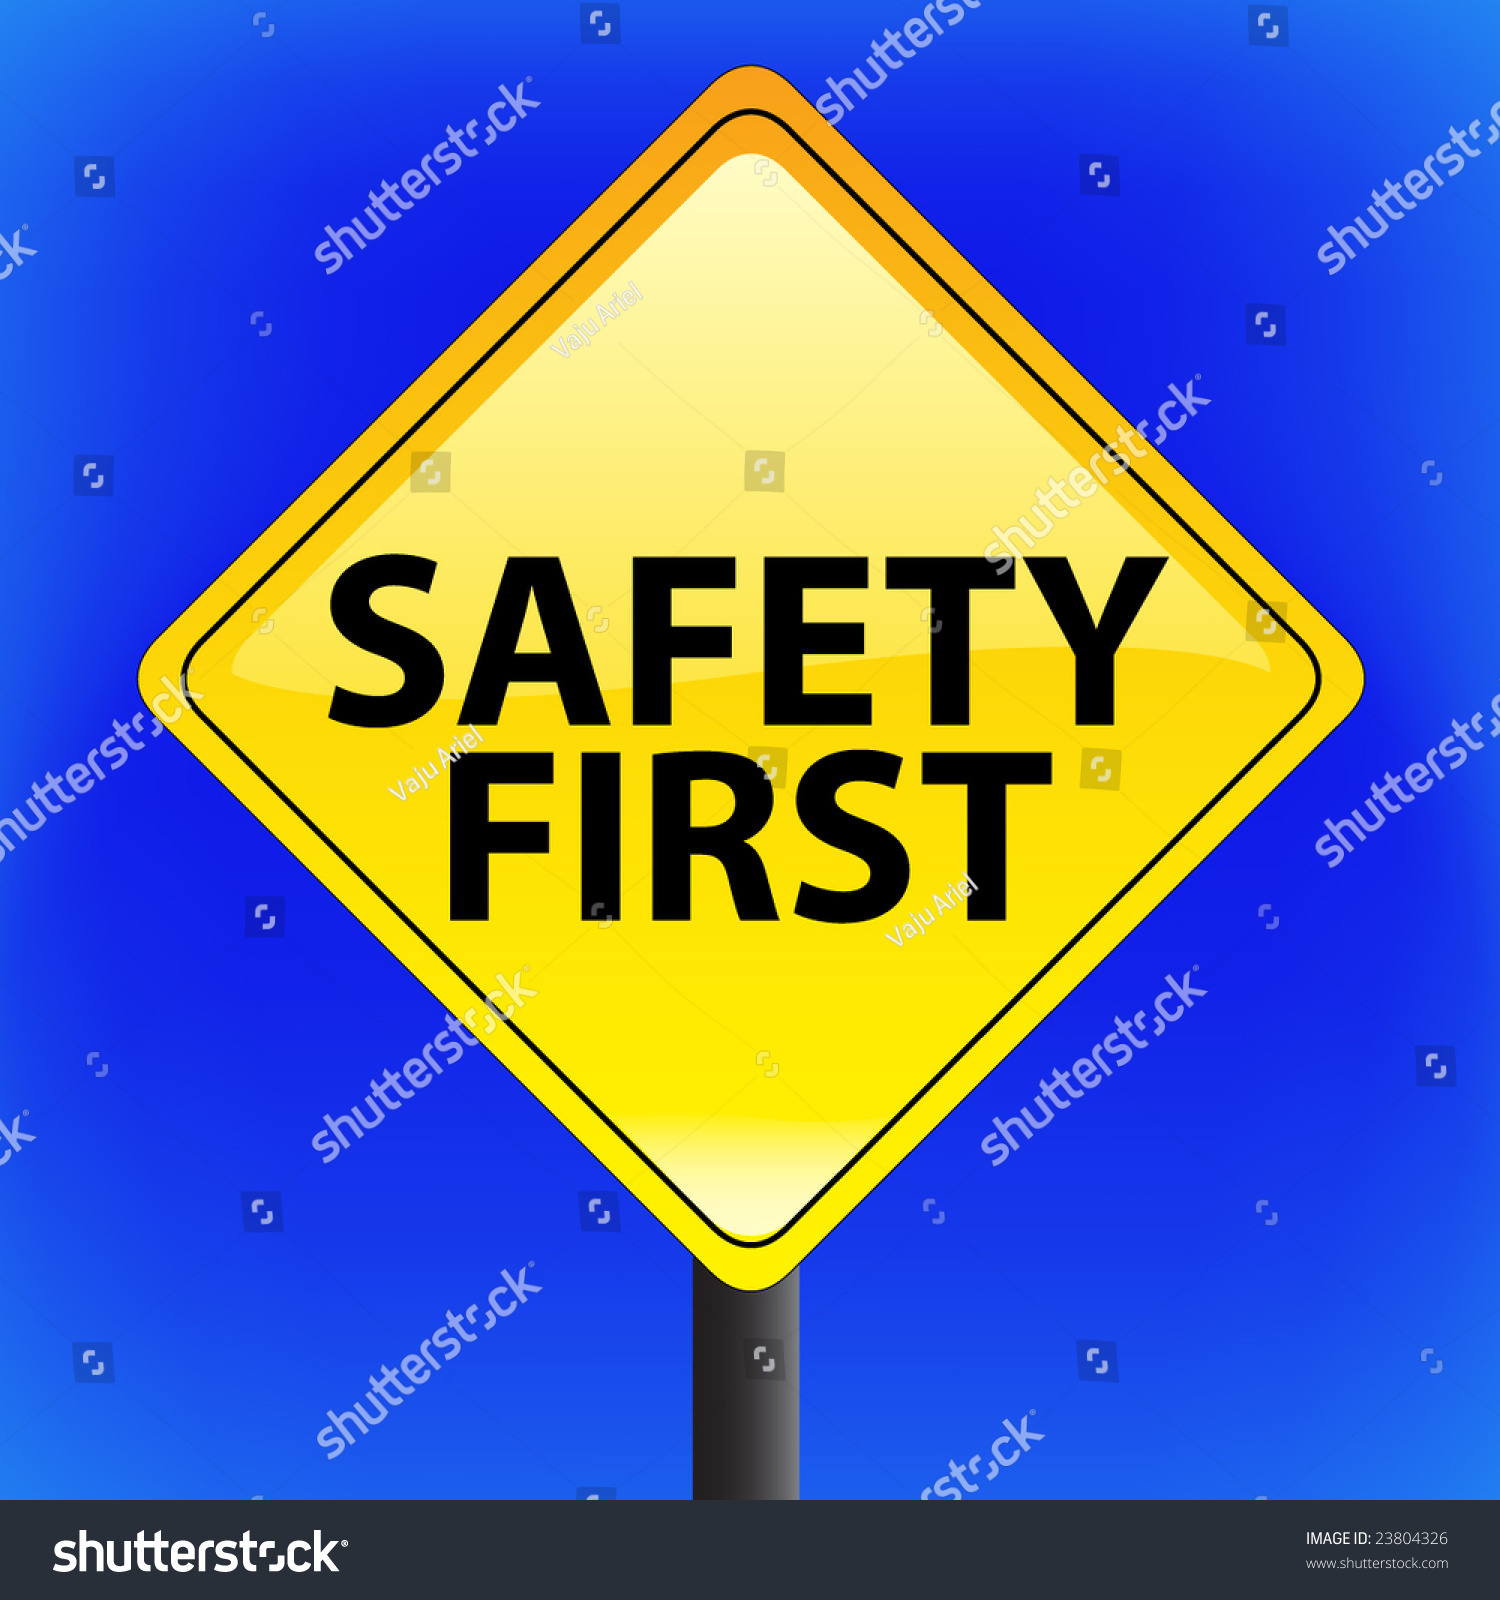 Vector Warning Safety First Sign With Sky In Background - 23804326 ...